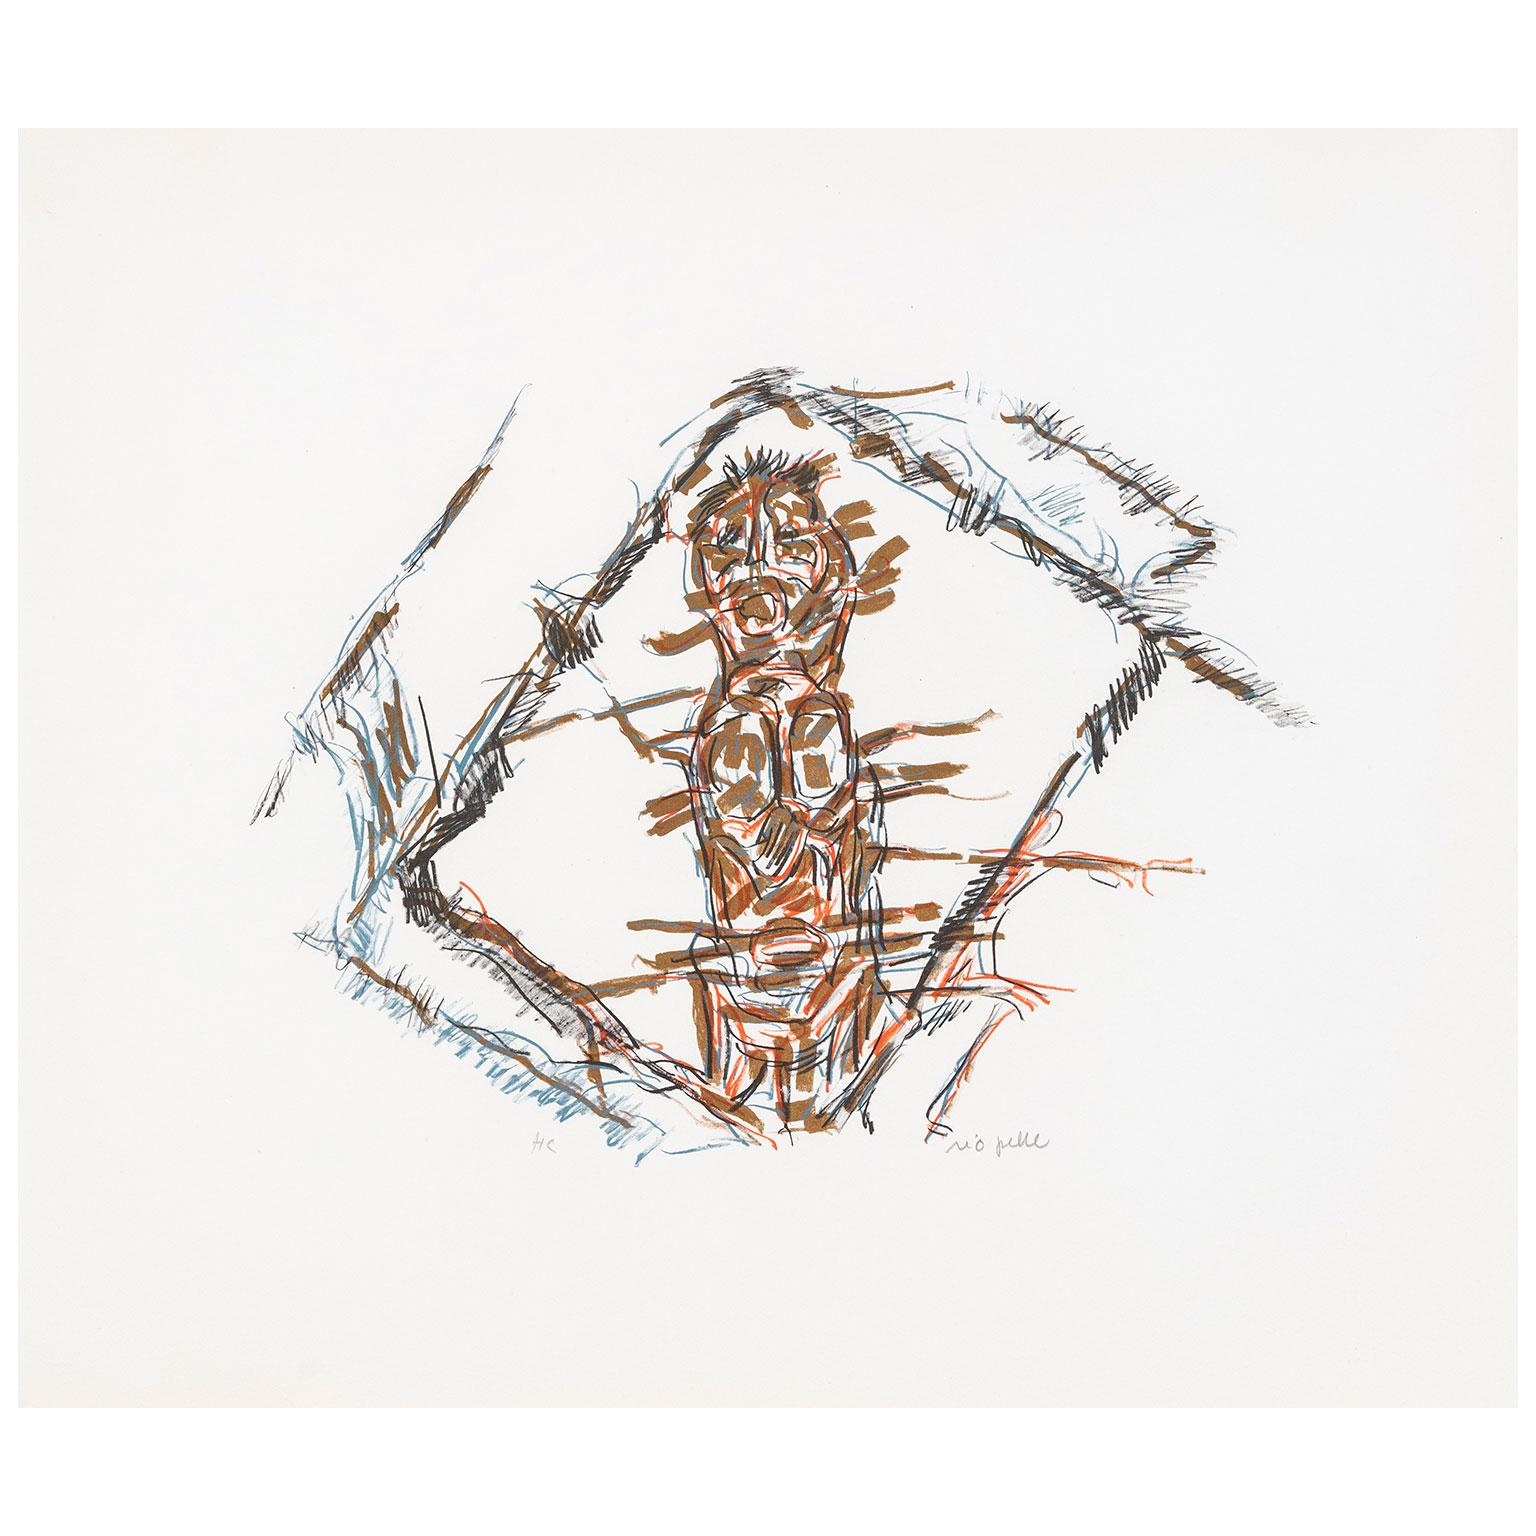 With a world auction record of $2.3 million, achieved at Christie's in Paris in 2012, Jean-Paul Riopelle (1923-2002) is arguably the most successful post-war abstract painter from Canada.

While Americans have traditionally favored Jackson Pollock